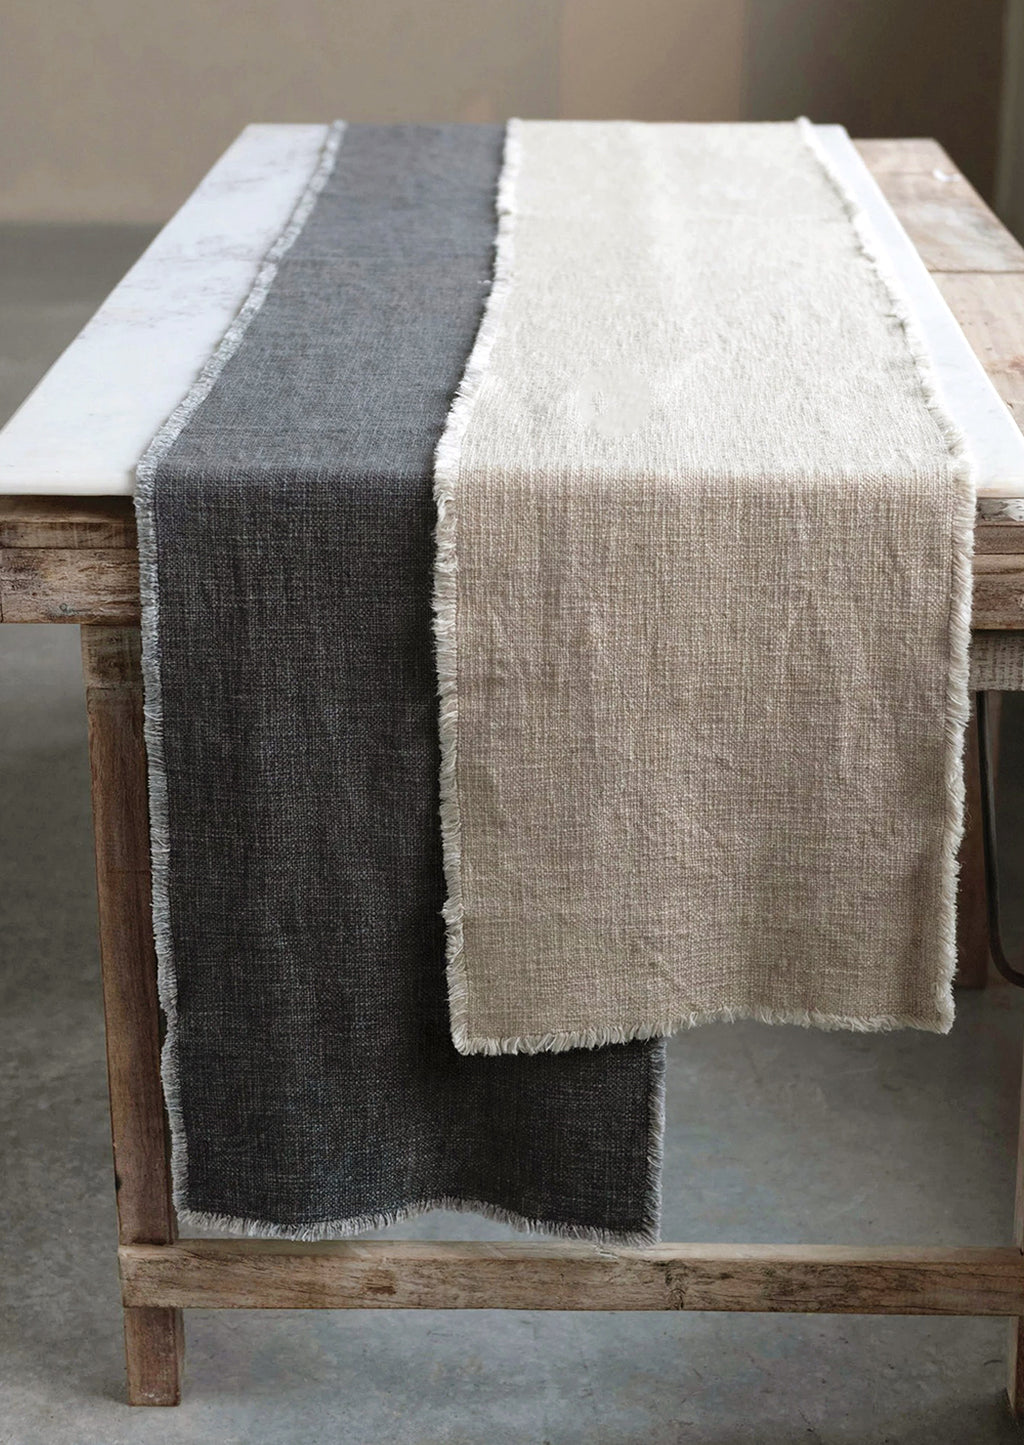 1: Linen blend table runners in beige and charcoal.